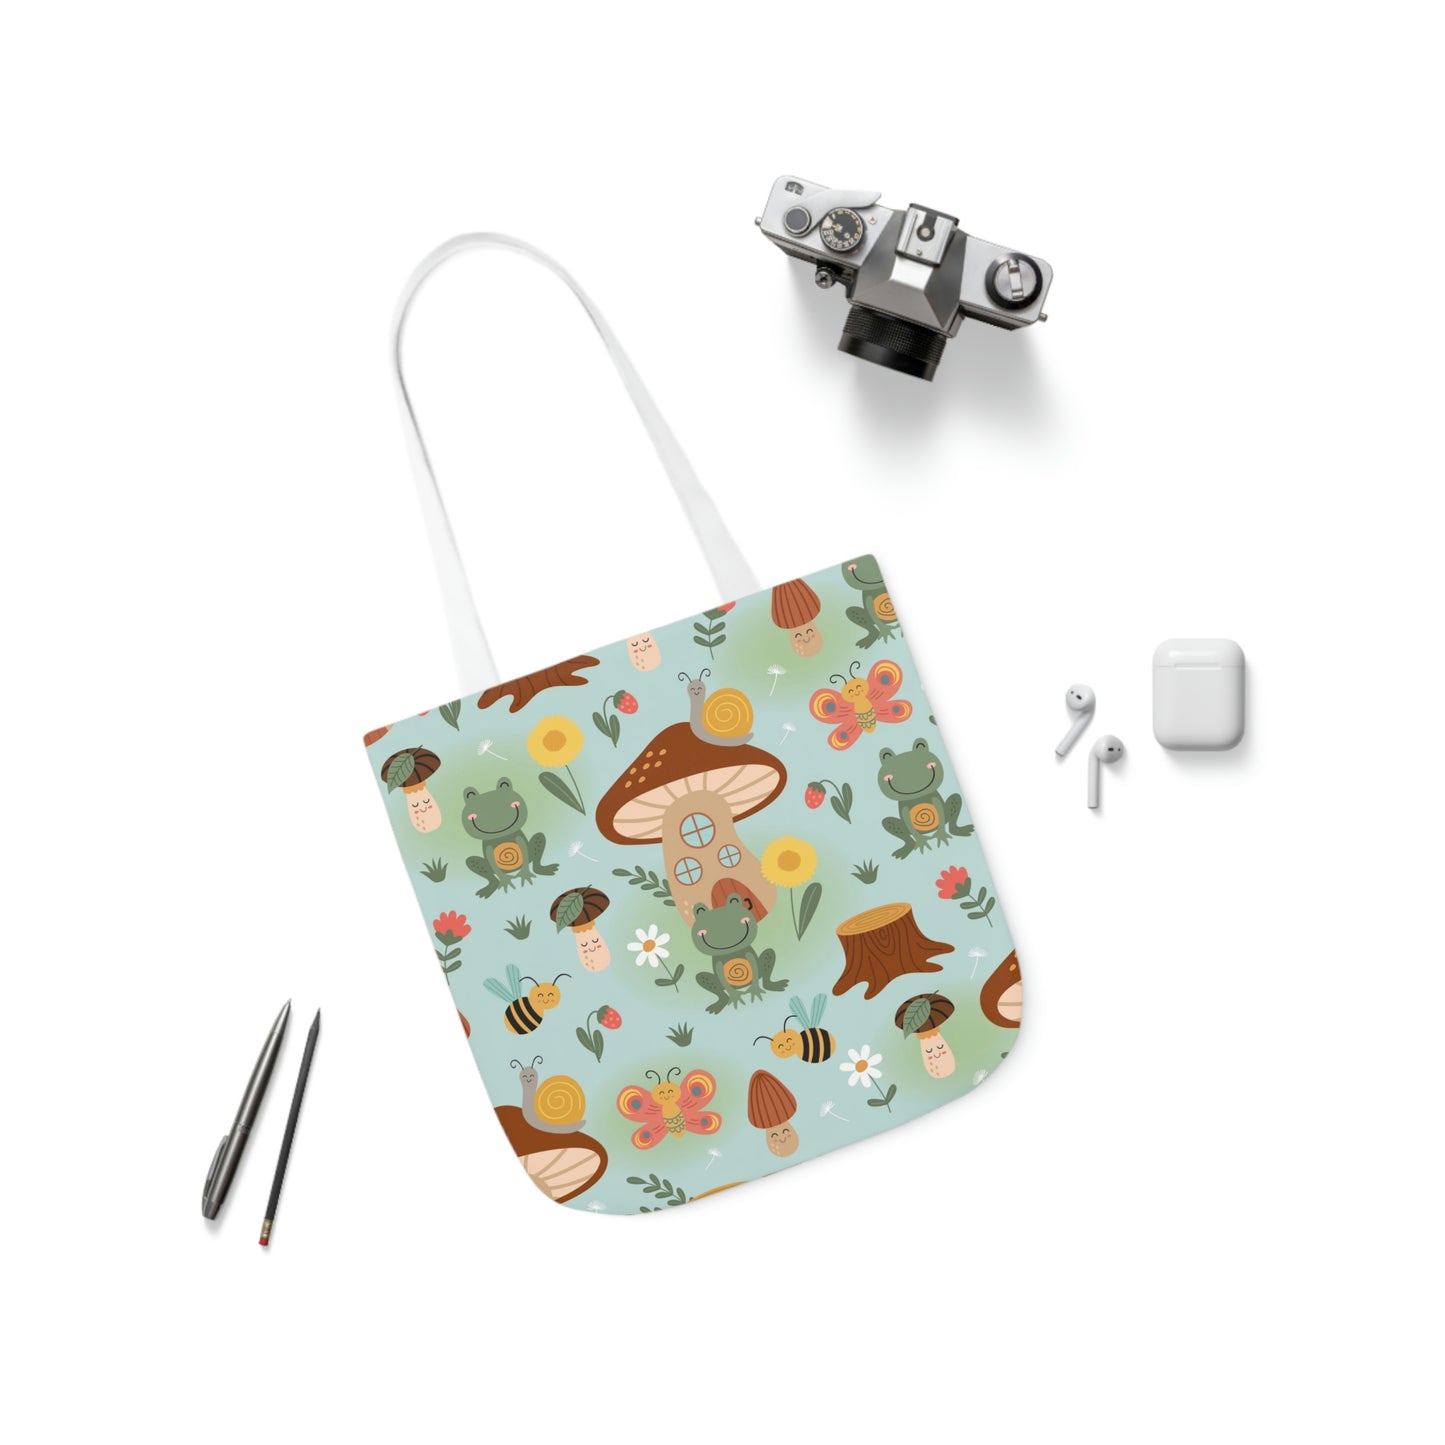 Frogs and Mushrooms Polyester Canvas Tote Bag